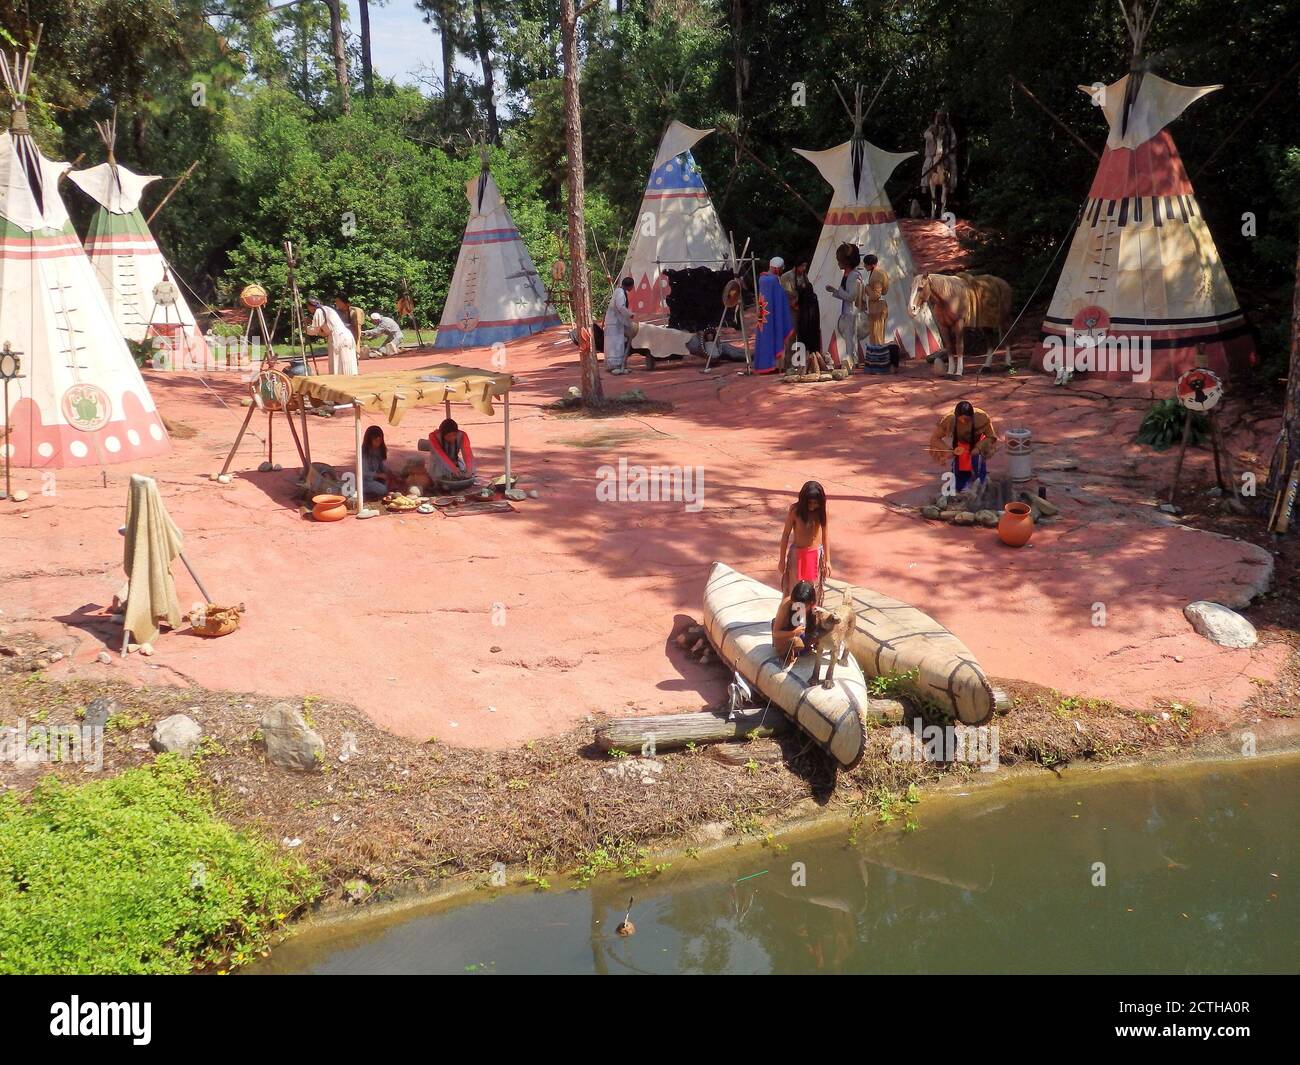 A Native American village display on the banks of a river at Walt Disney World, Orlando Florida, United States Stock Photo